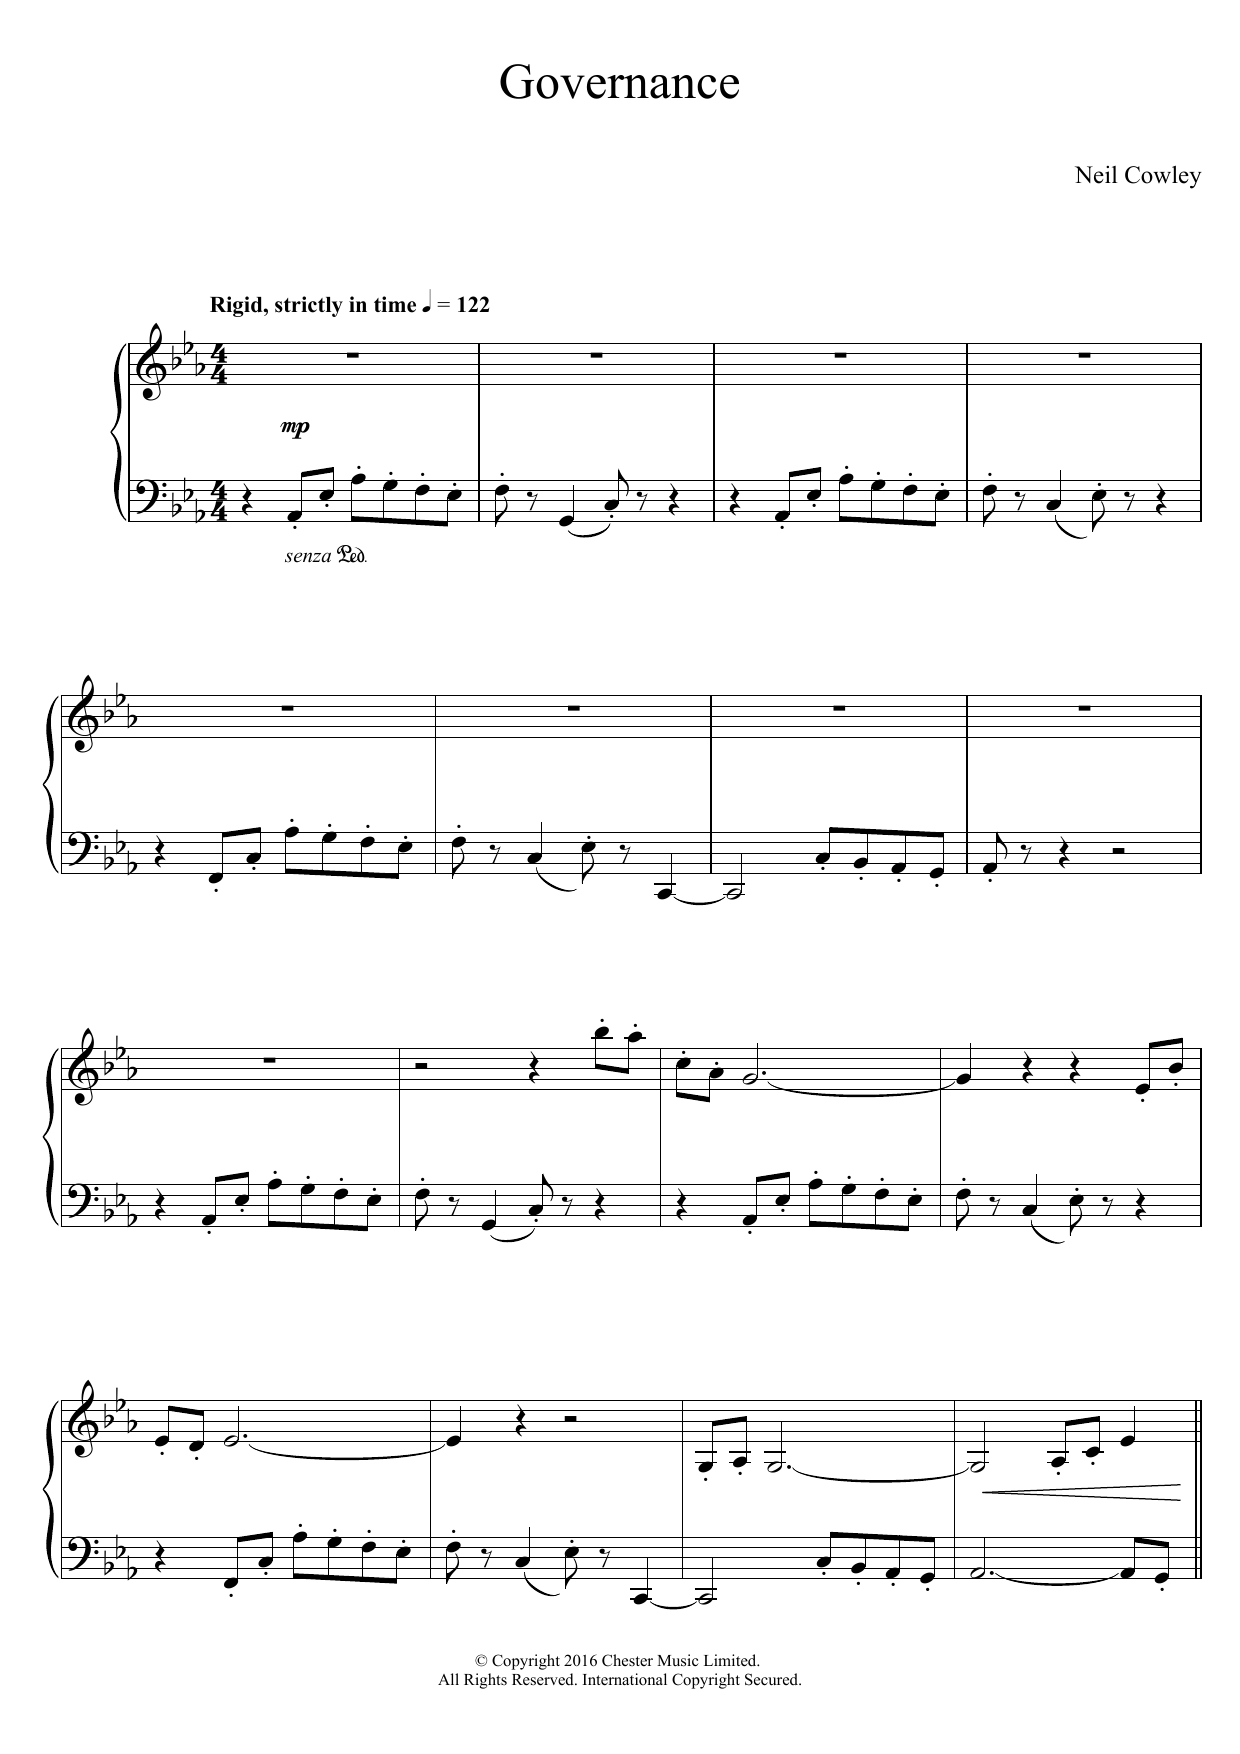 Download Neil Cowley Trio Governance Sheet Music